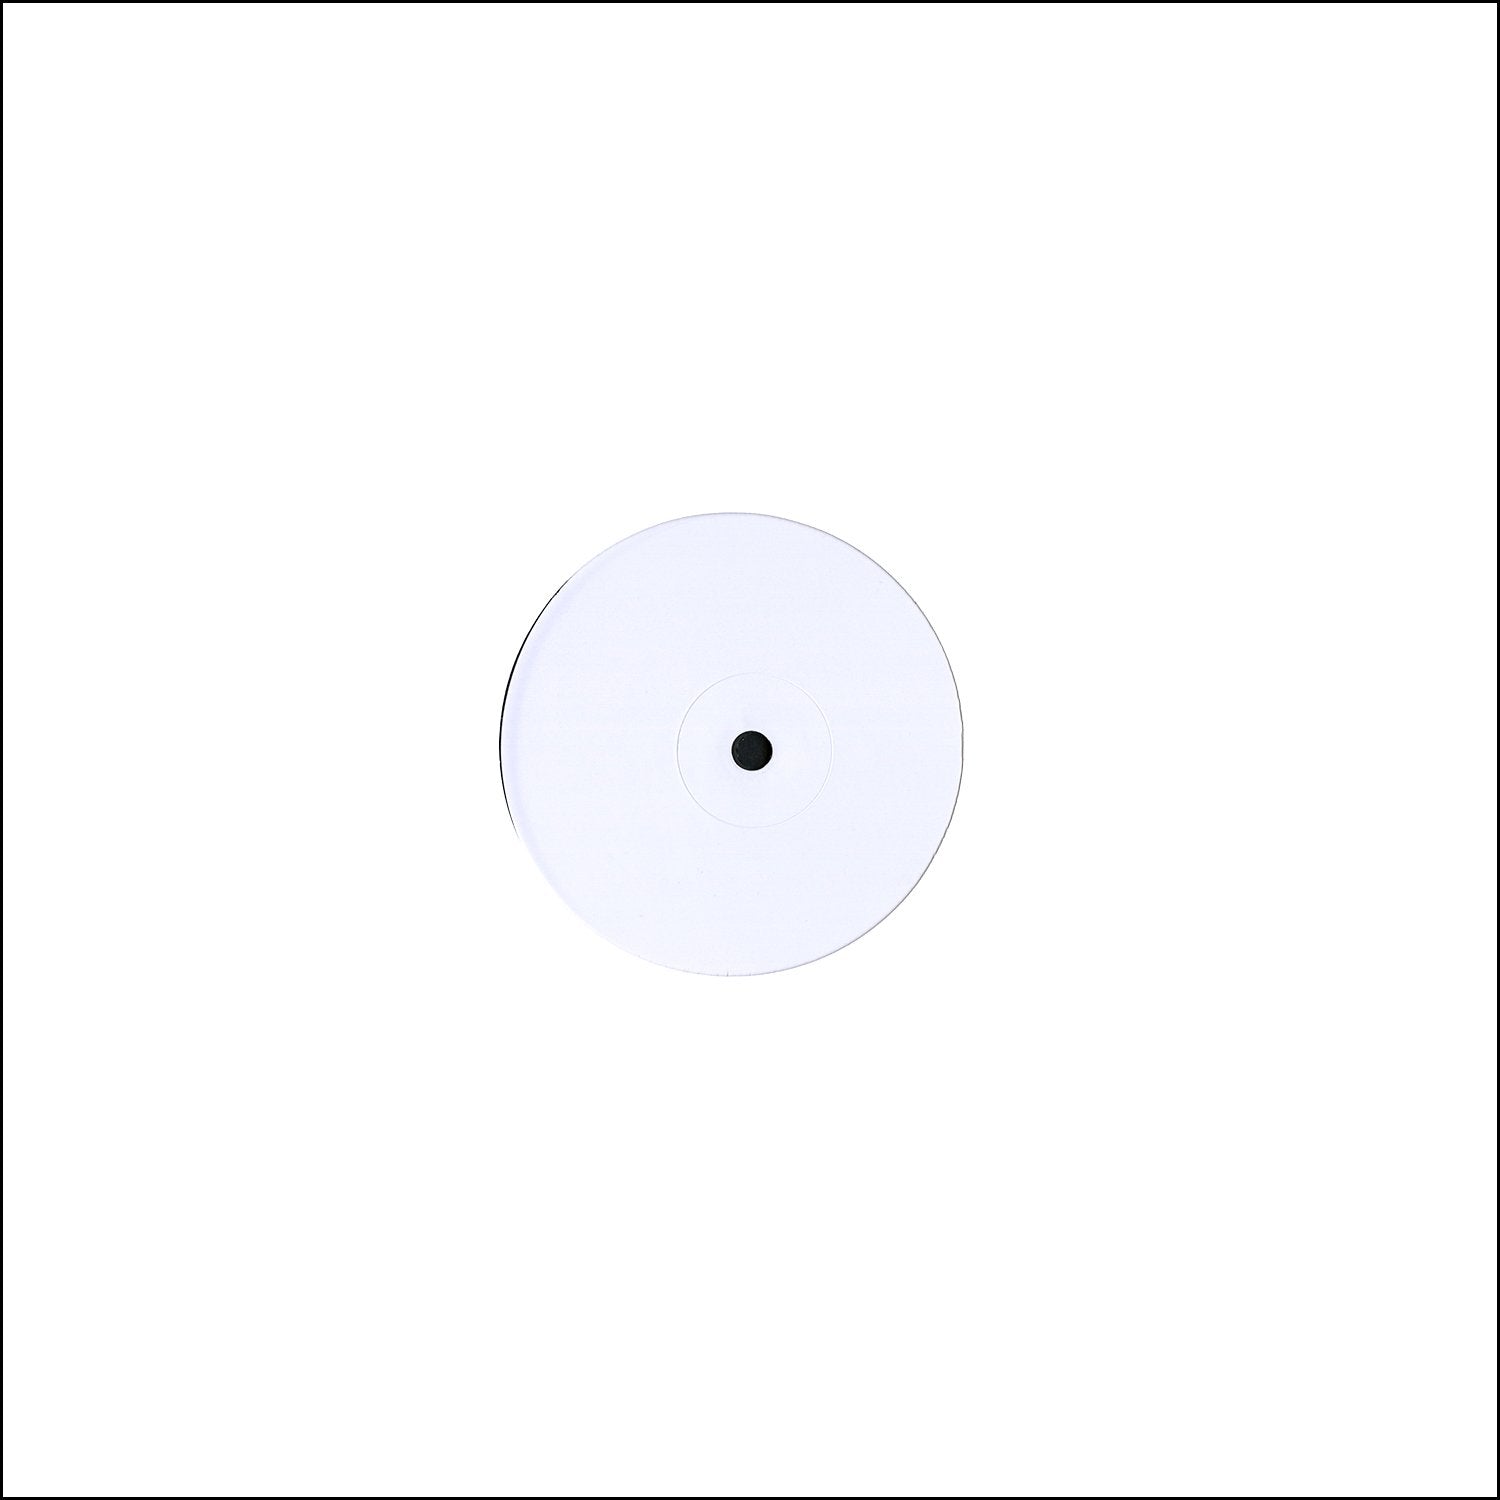 Goin' Your Way (Highlights) [Test Pressing]